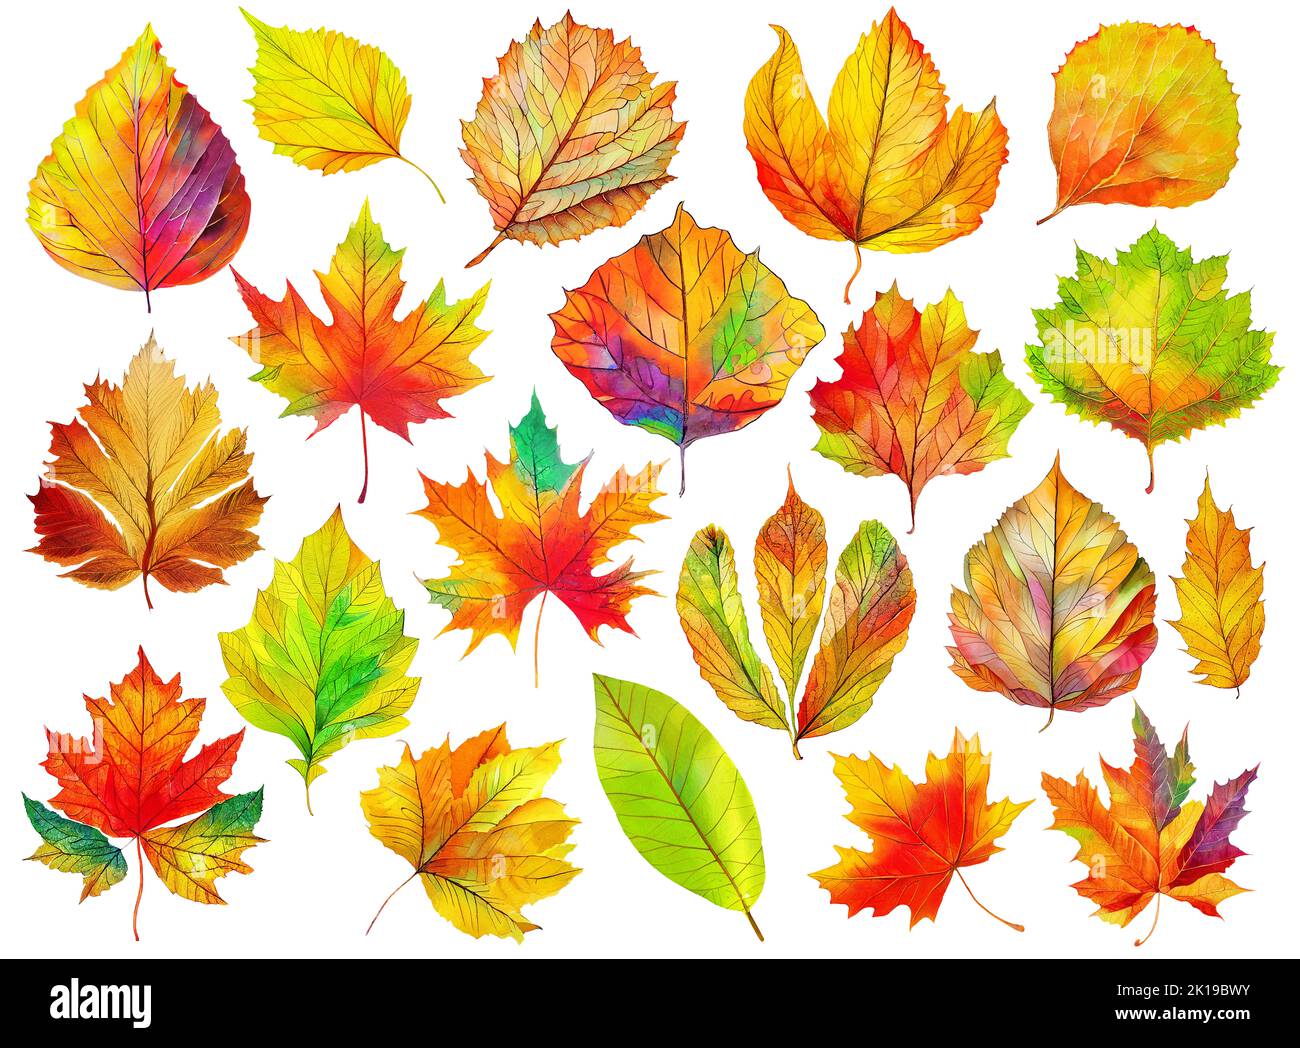 Collection of decorative colorful autumn tree leaves isolated on white background. Digital illustration based on render by neural network Stock Photo